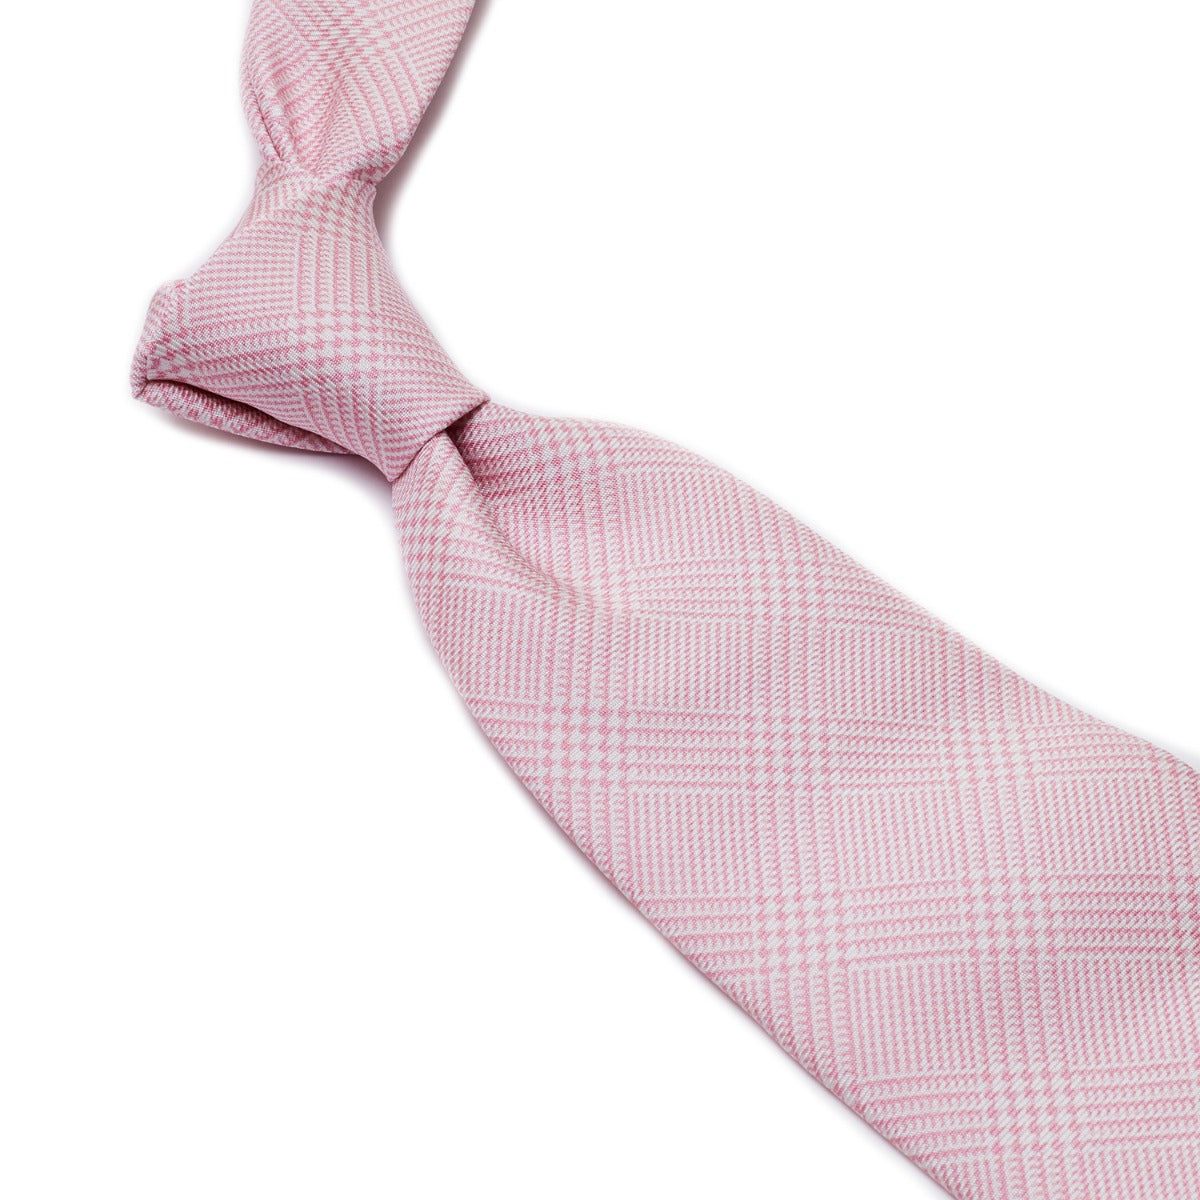 Handmade Sovereign Grade Pink Prince of Wales Check, 150 CM tie from KirbyAllison.com.